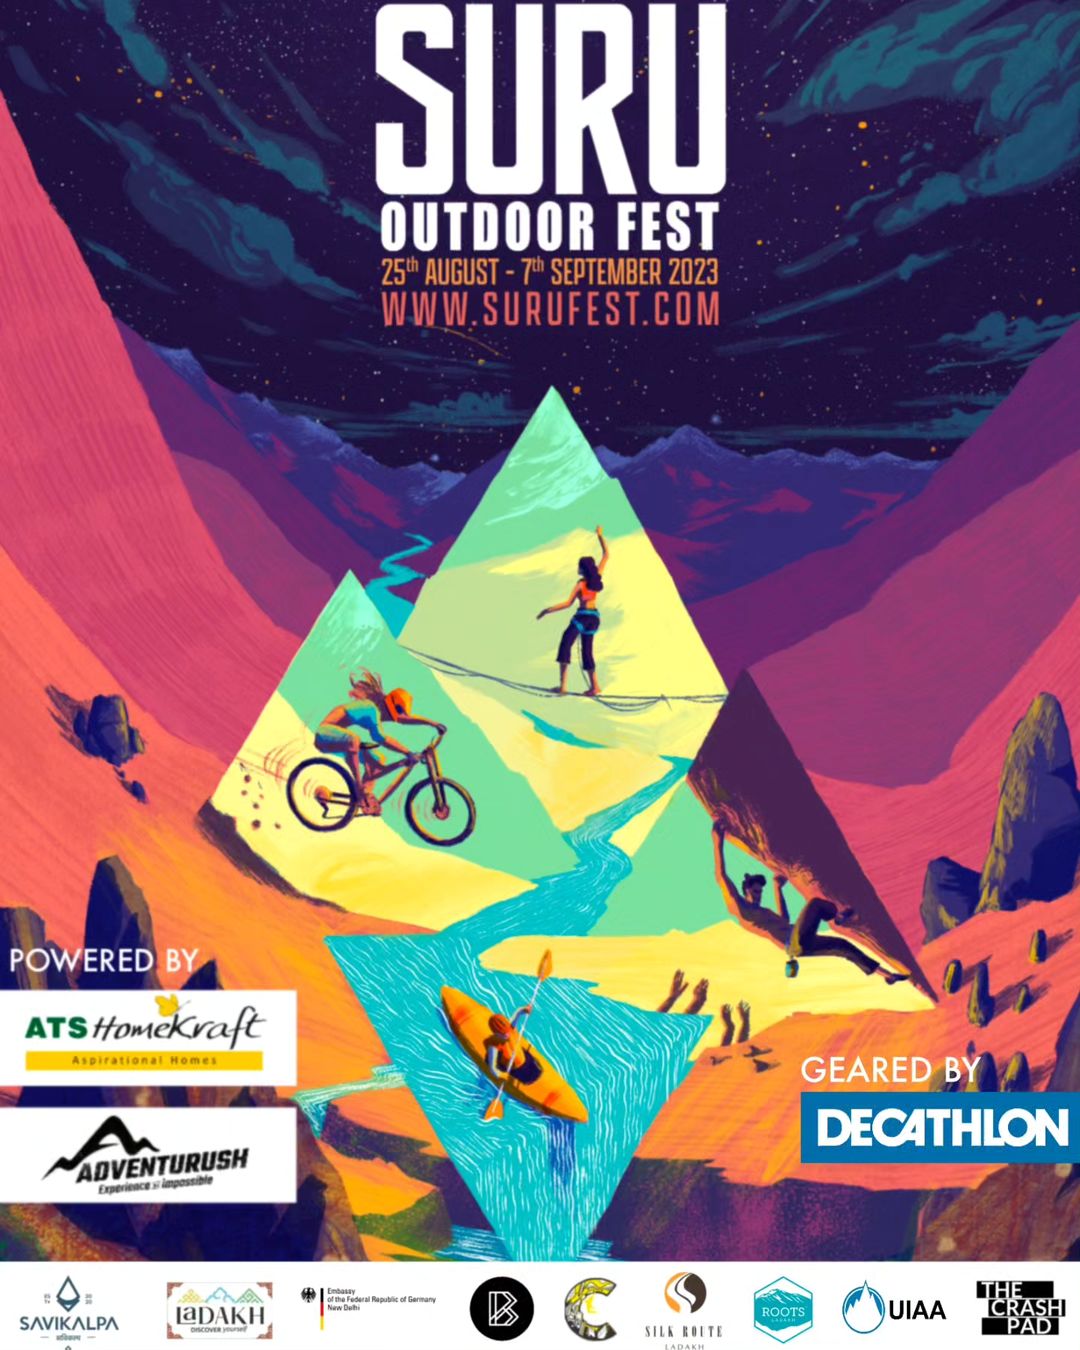 Suru Outdoor Fest promotional poster showcasing adventure sports and sponsors, August 2023